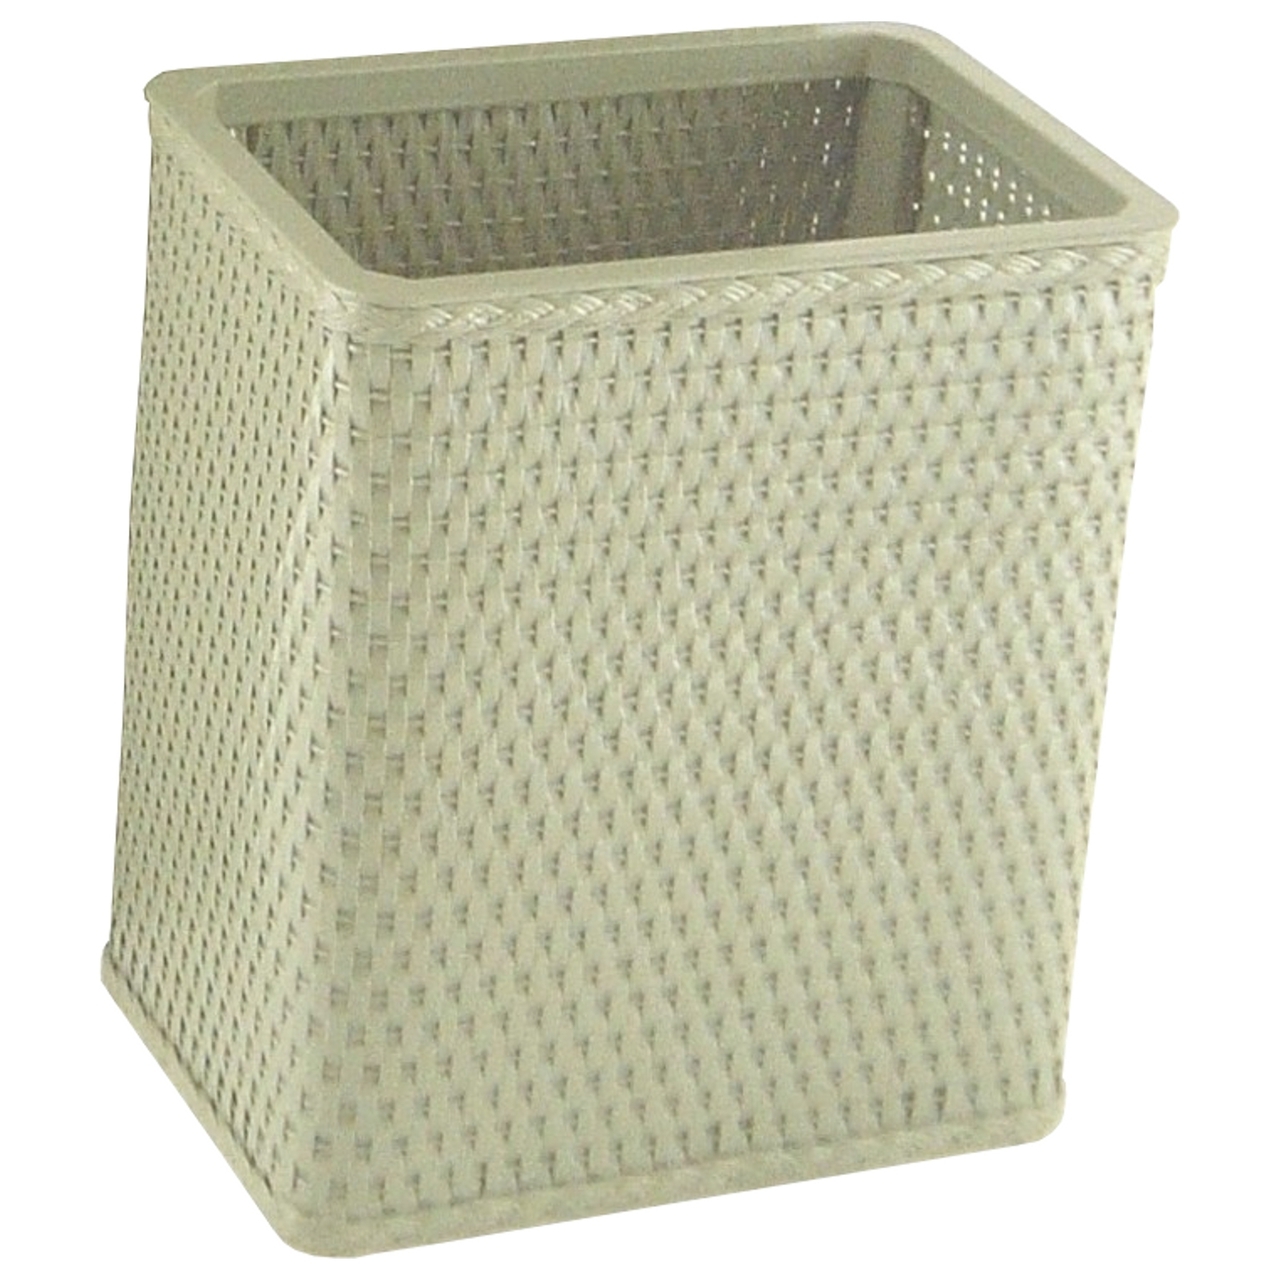 Disguise your trashcan by using a sleek basket that fits into the layout of your kitchen